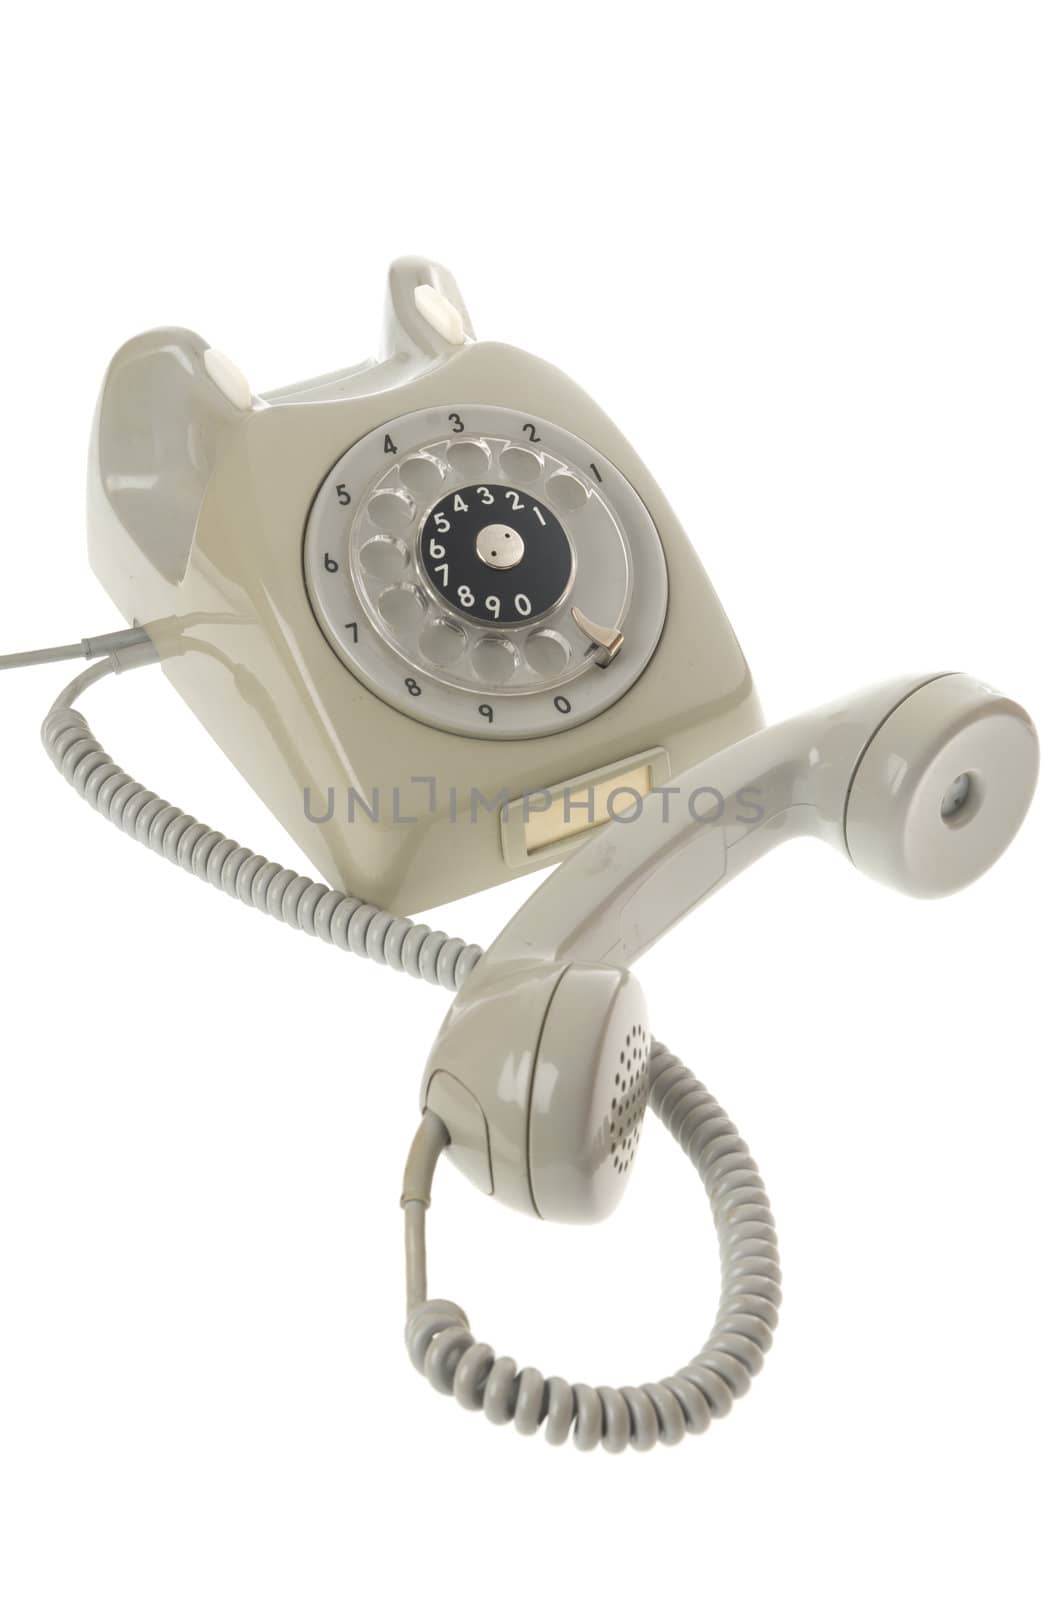 old gray vintage rotary style telephone off the hook -  solated on white